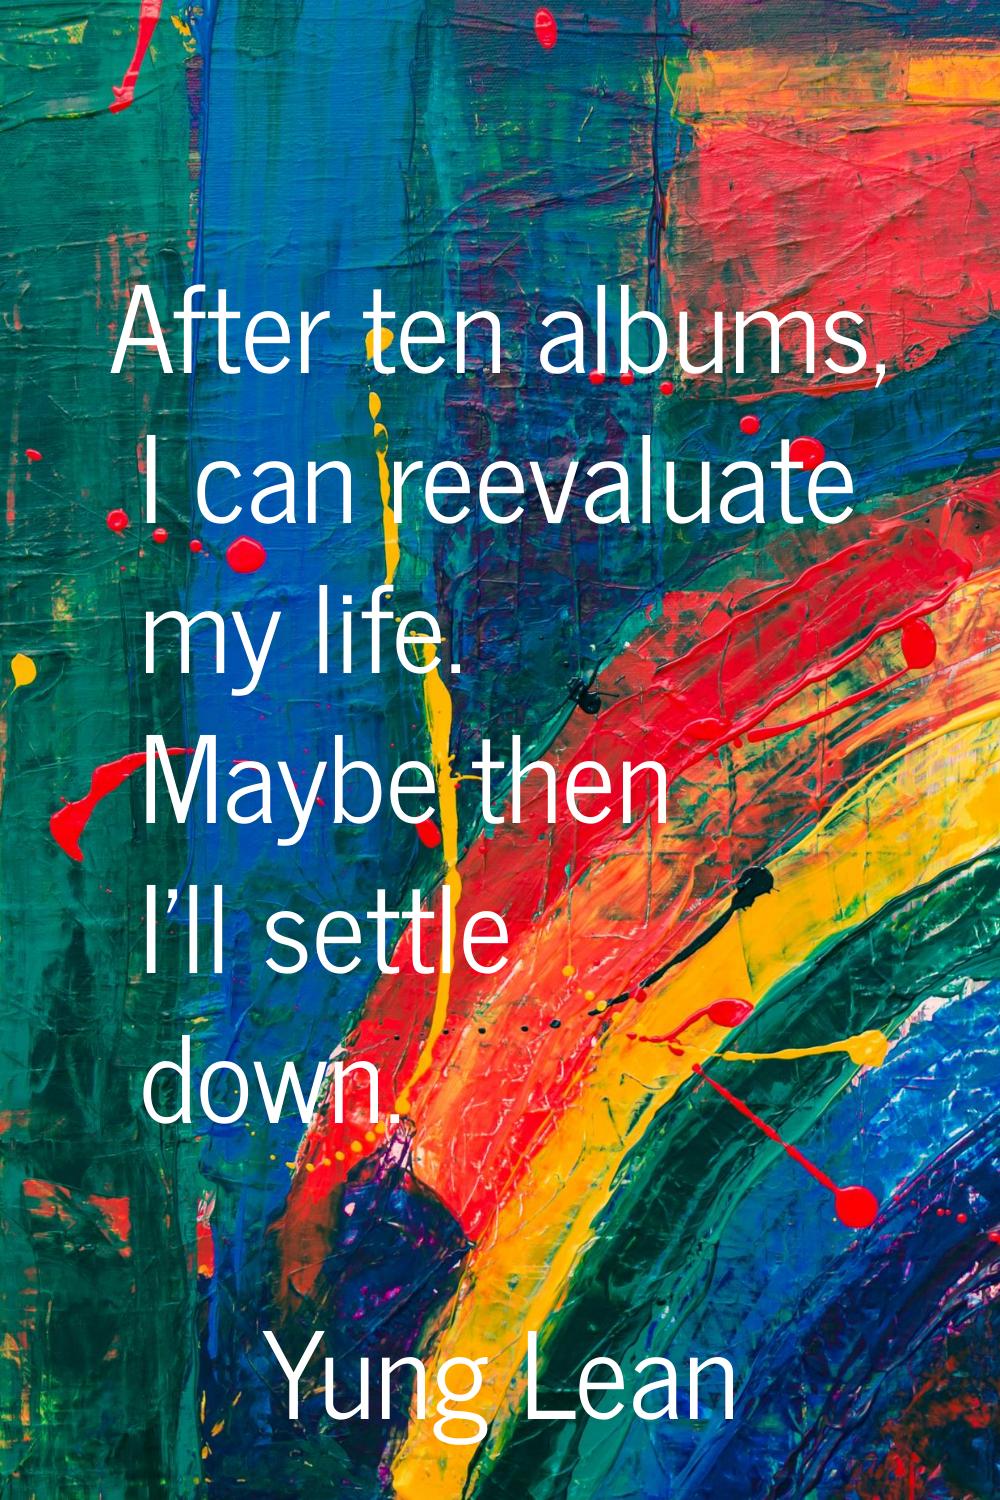 After ten albums, I can reevaluate my life. Maybe then I'll settle down.